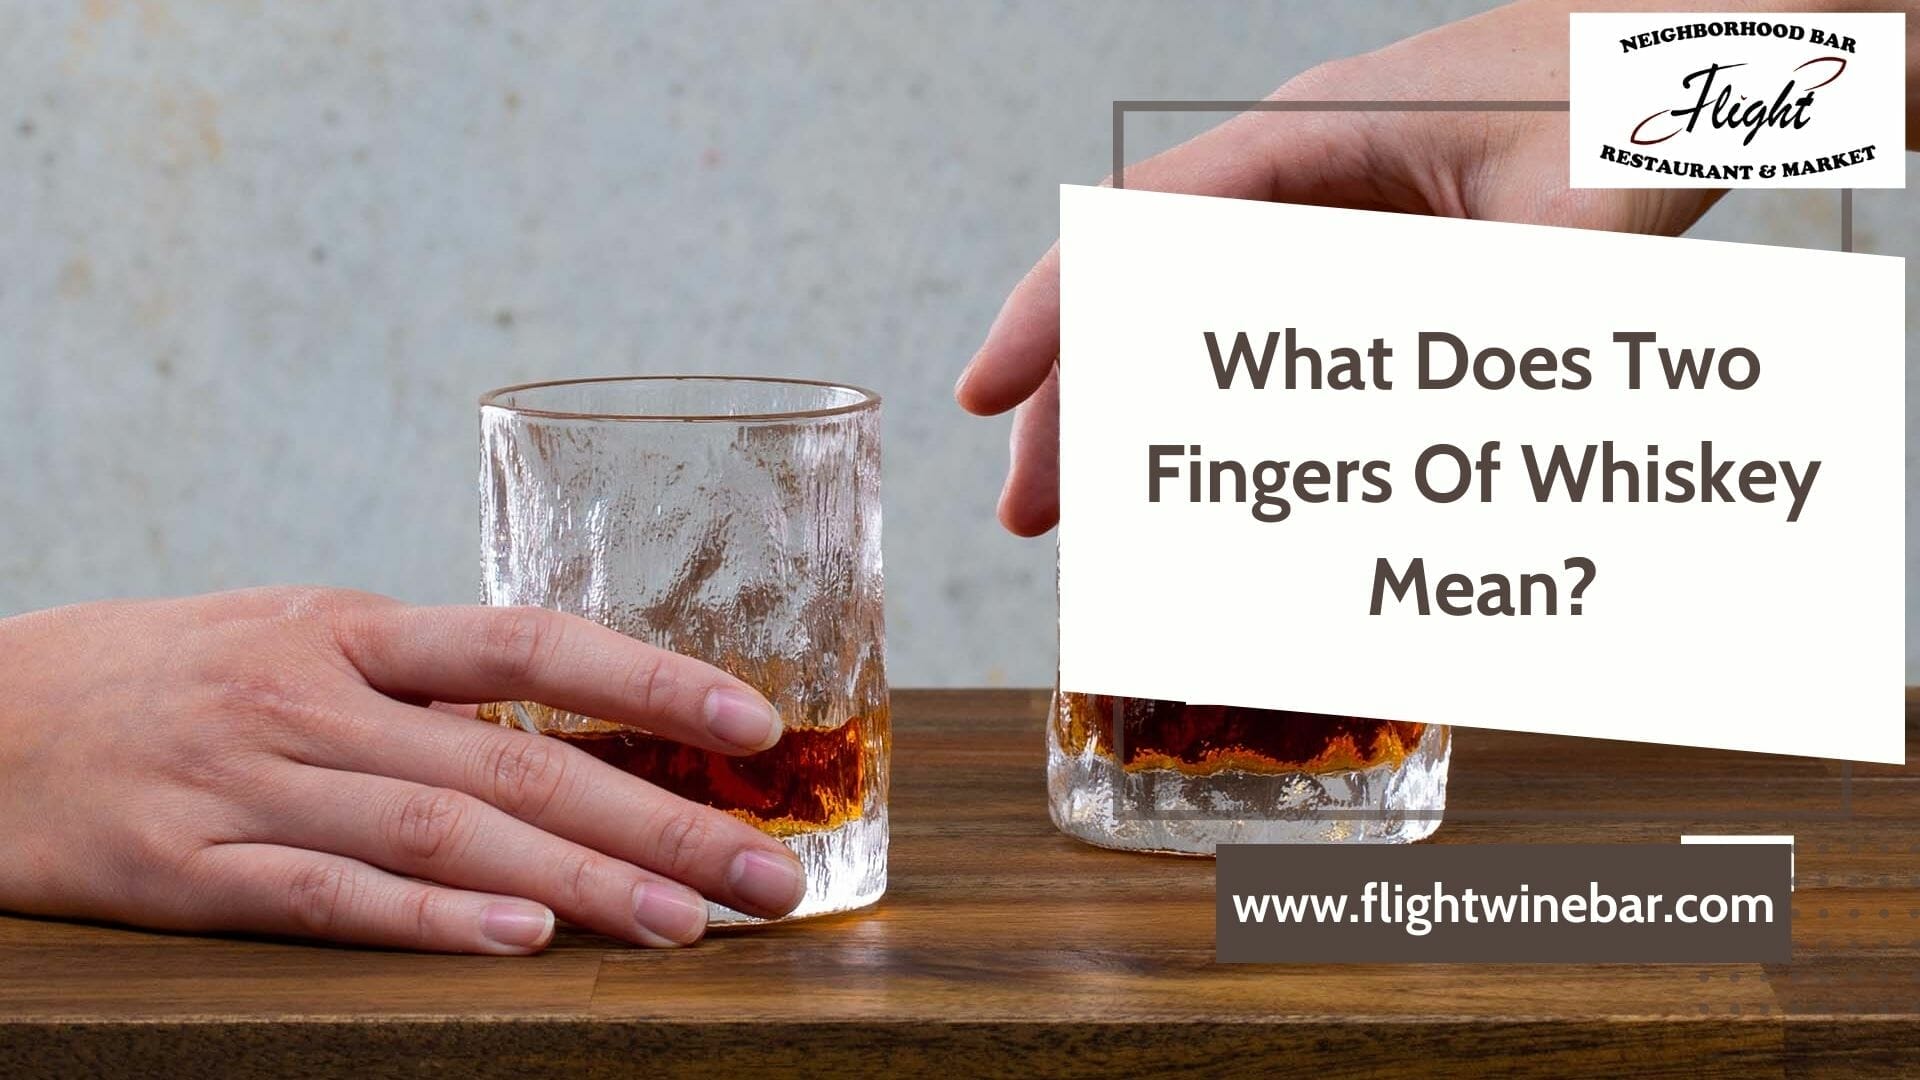 What Does Two Fingers Of Whiskey Mean